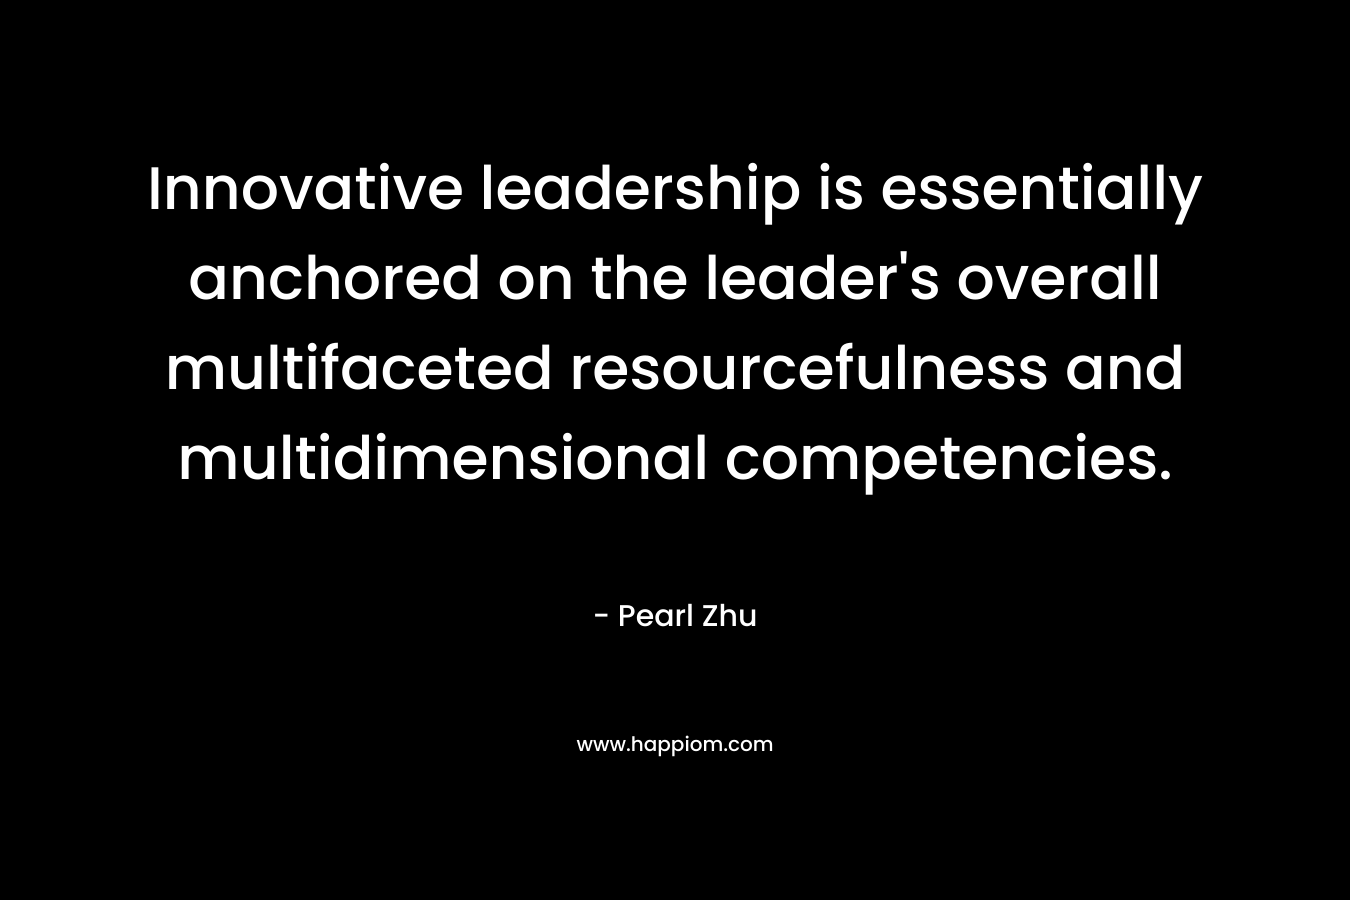 Innovative leadership is essentially anchored on the leader's overall multifaceted resourcefulness and multidimensional competencies.